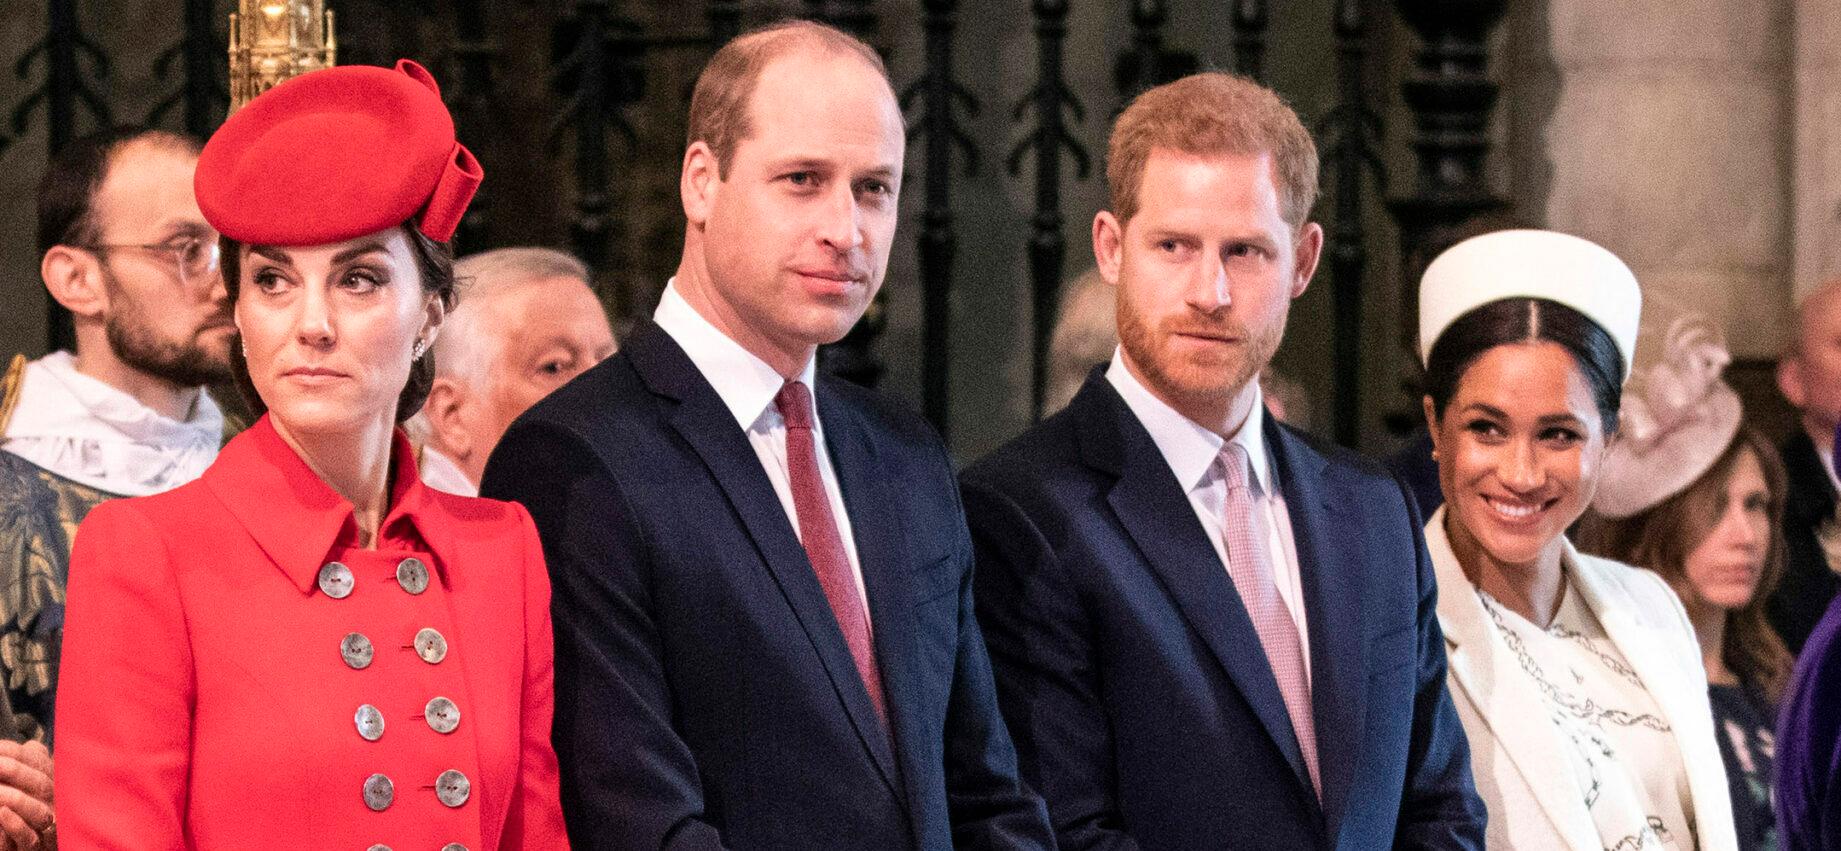 Members of The Royal Family attend the Commonwealth Service on Commonwealth Day, at Westminster Abbey, London, UK, on the 11th March 2019. Picture by Richard Pohle/WPA-Pool. 11 Mar 2019 Pictured: Catherine, Duchess of Cambridge, Kate Middleton, Prince William, Duke of Cambridge, Prince Harry, Duke of Sussex, Meghan Markle, Duchess of Sussex.